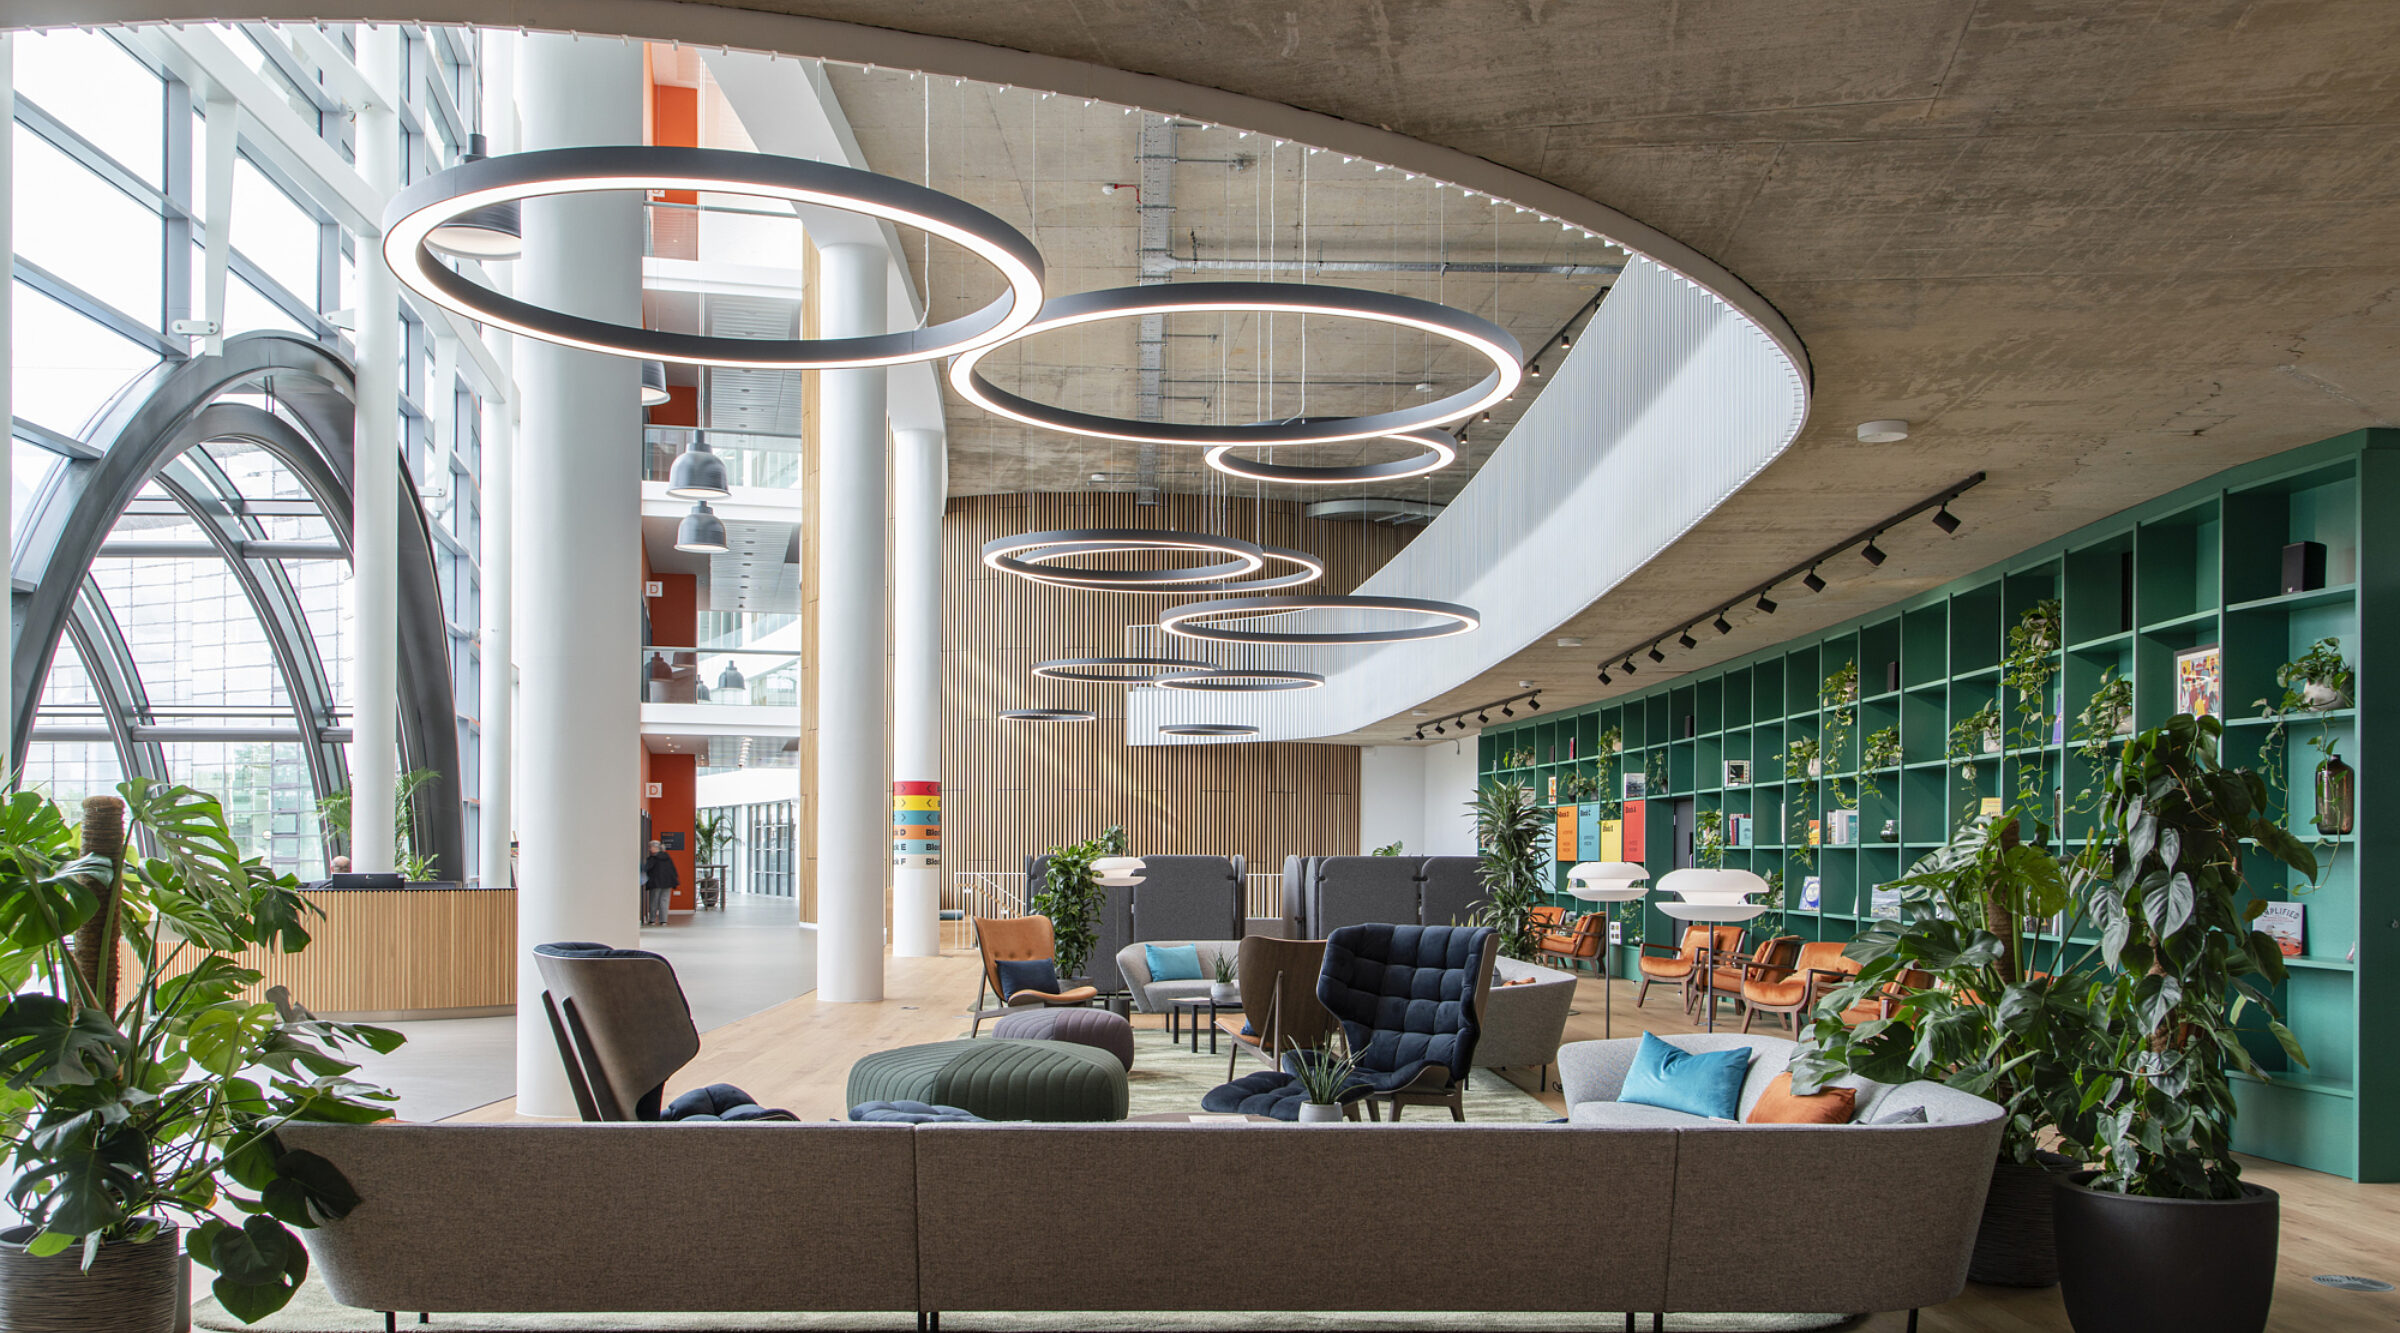 A modern office breakout area with circular overhead lighting, stylish seating, and vibrant greenery set against expansive windows and a teal bookcase